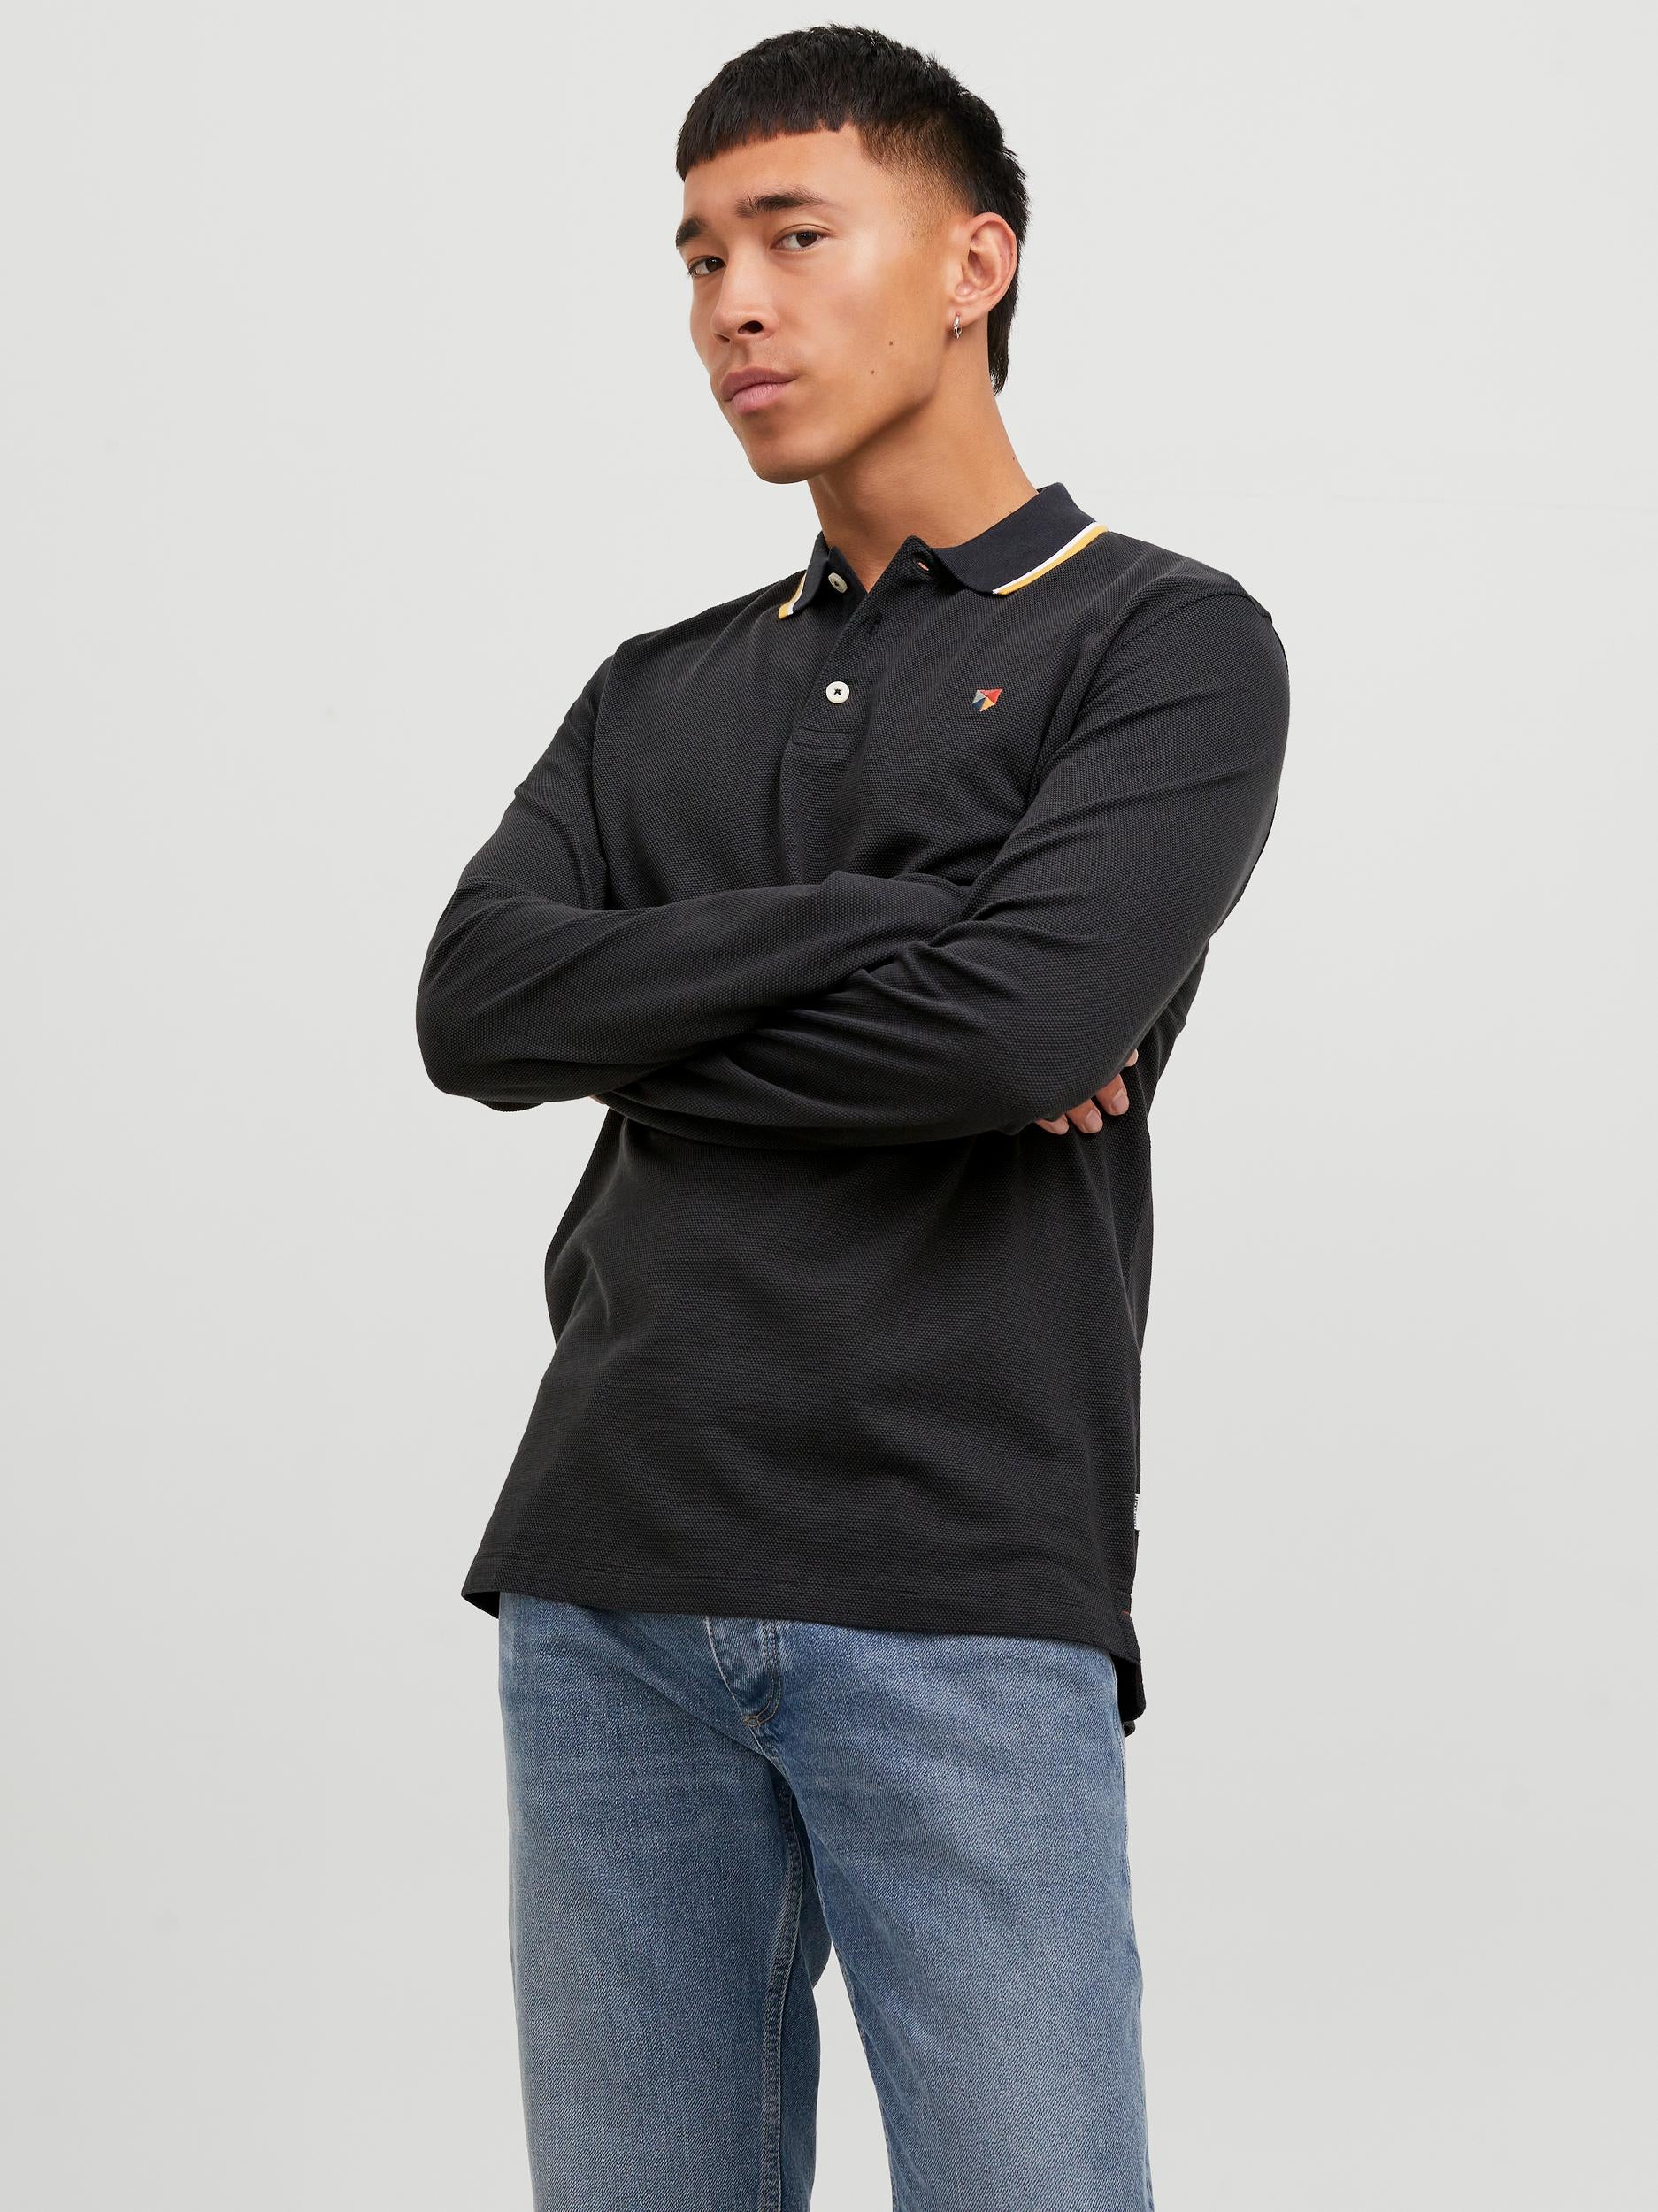 Men's Win Polo Long Sleeve-Black-Front View